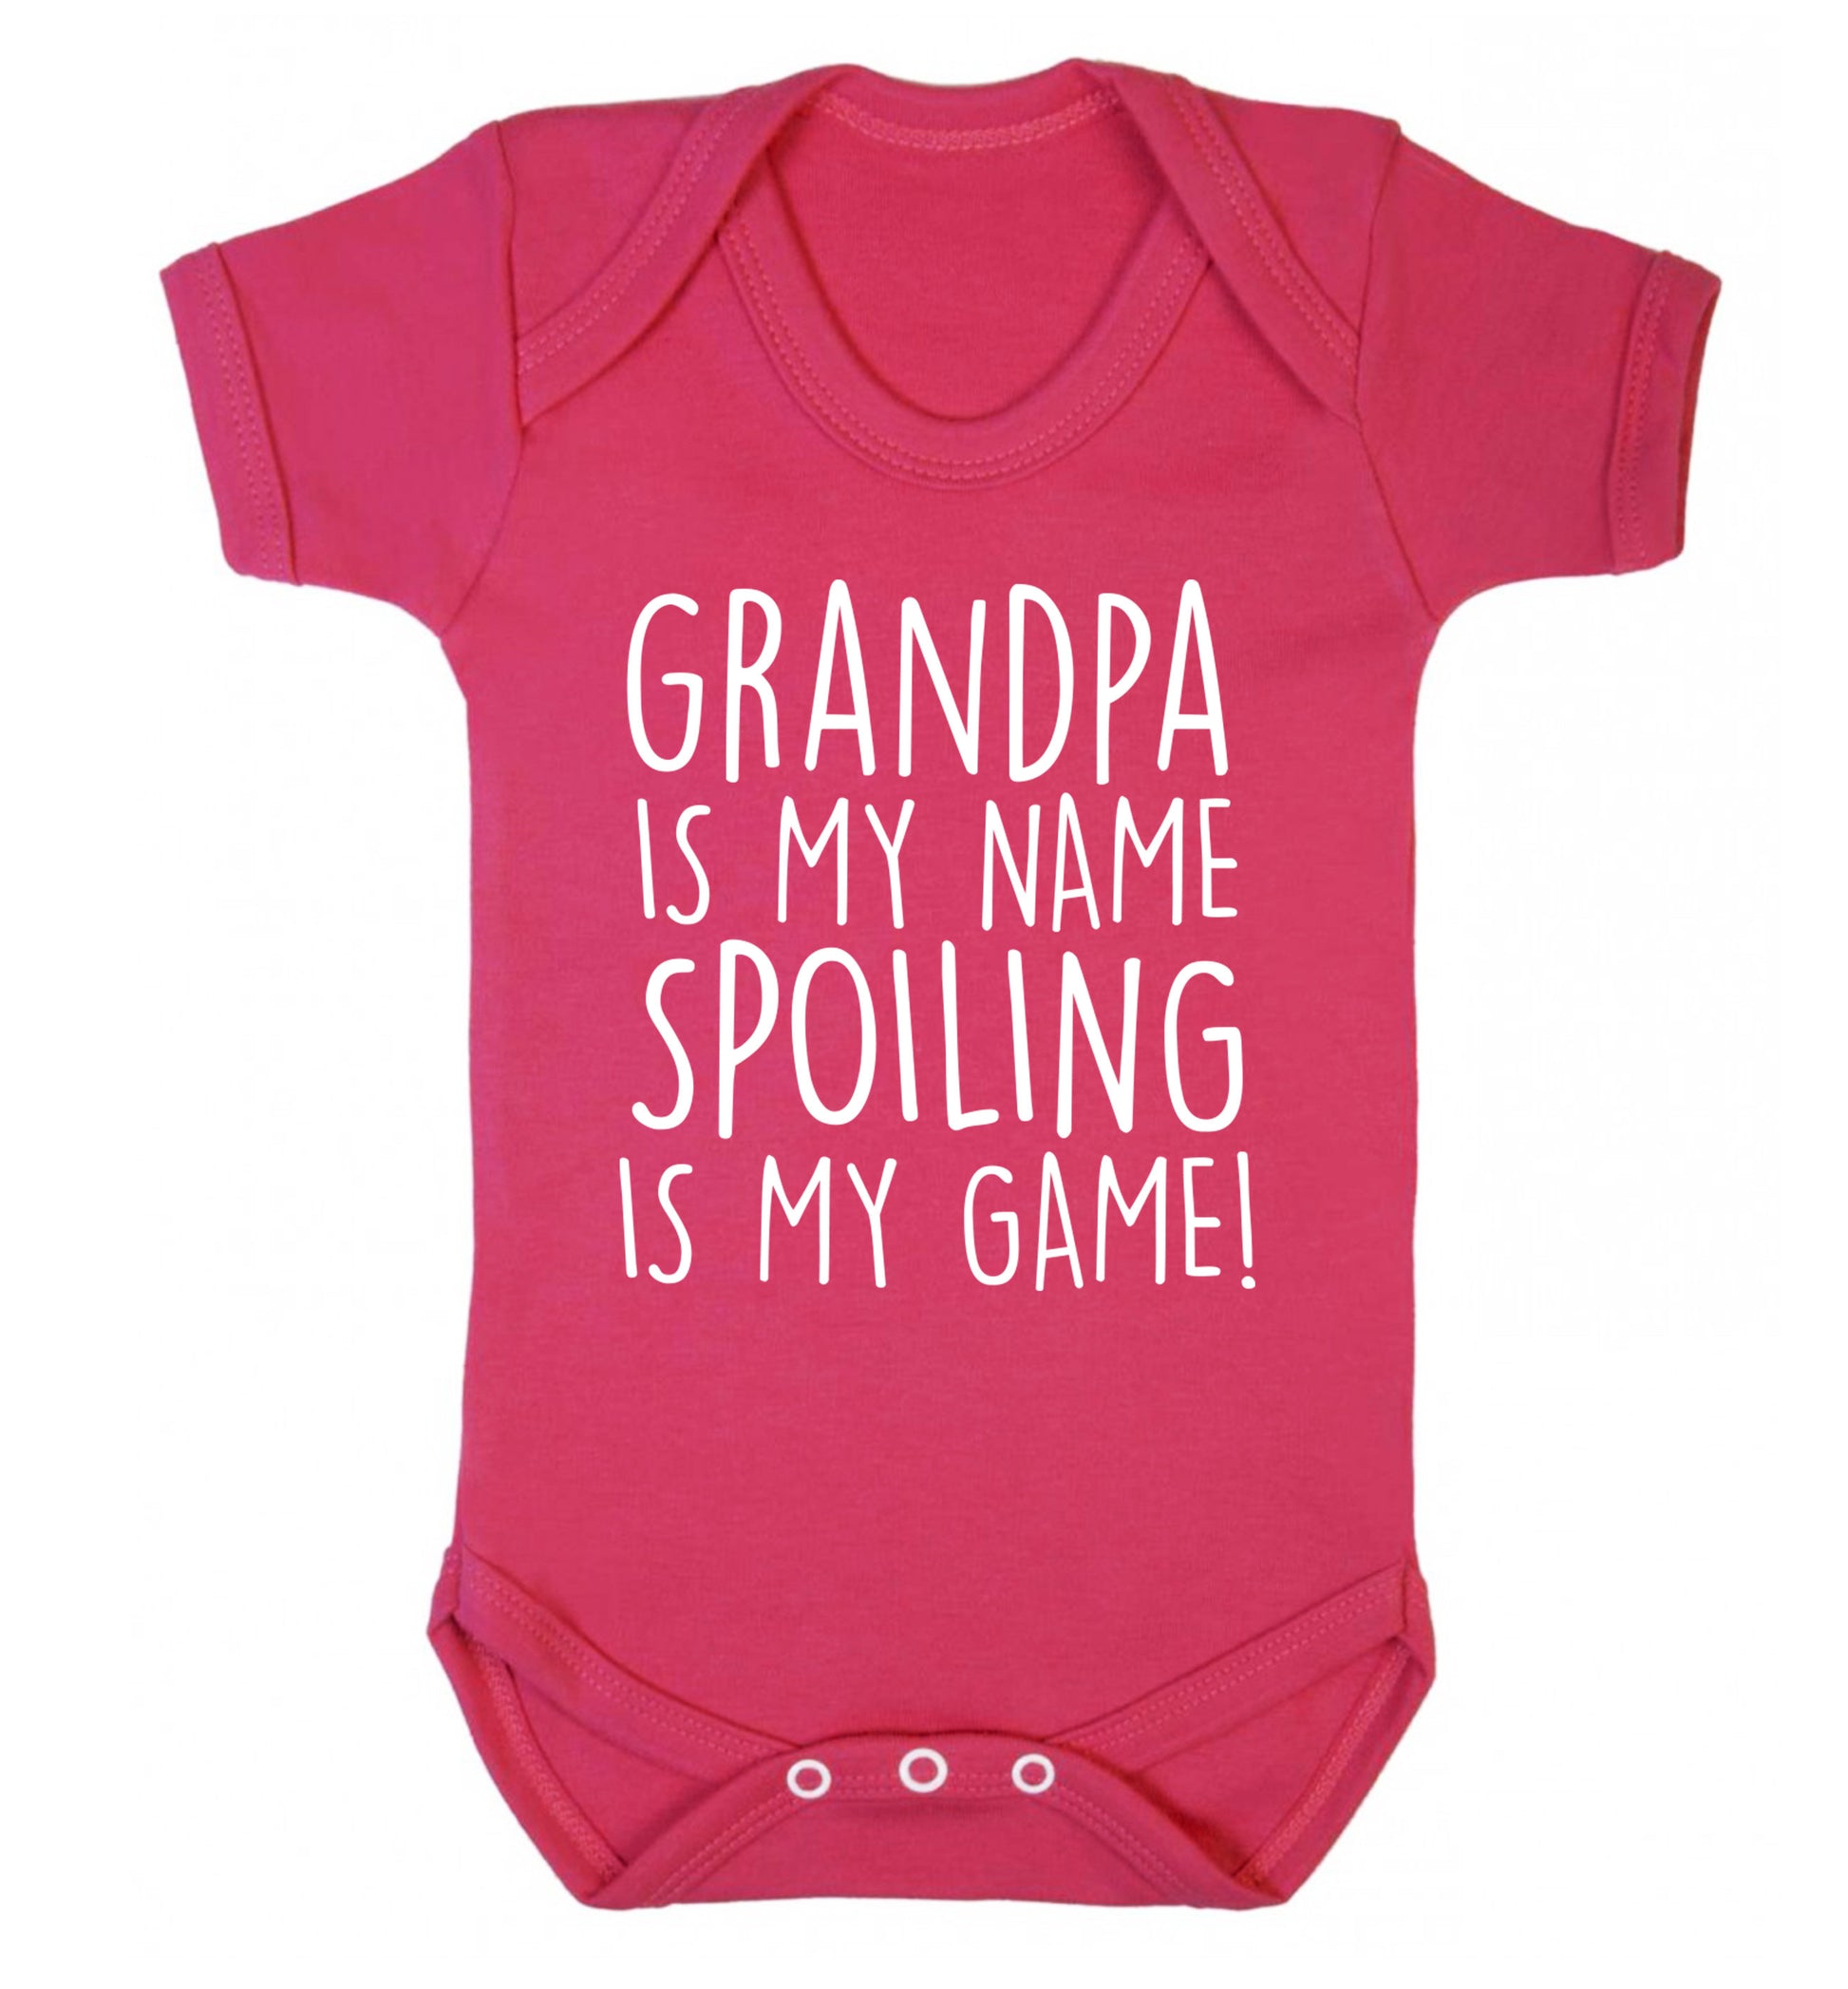 Grandpa is my name, spoiling is my game Baby Vest dark pink 18-24 months